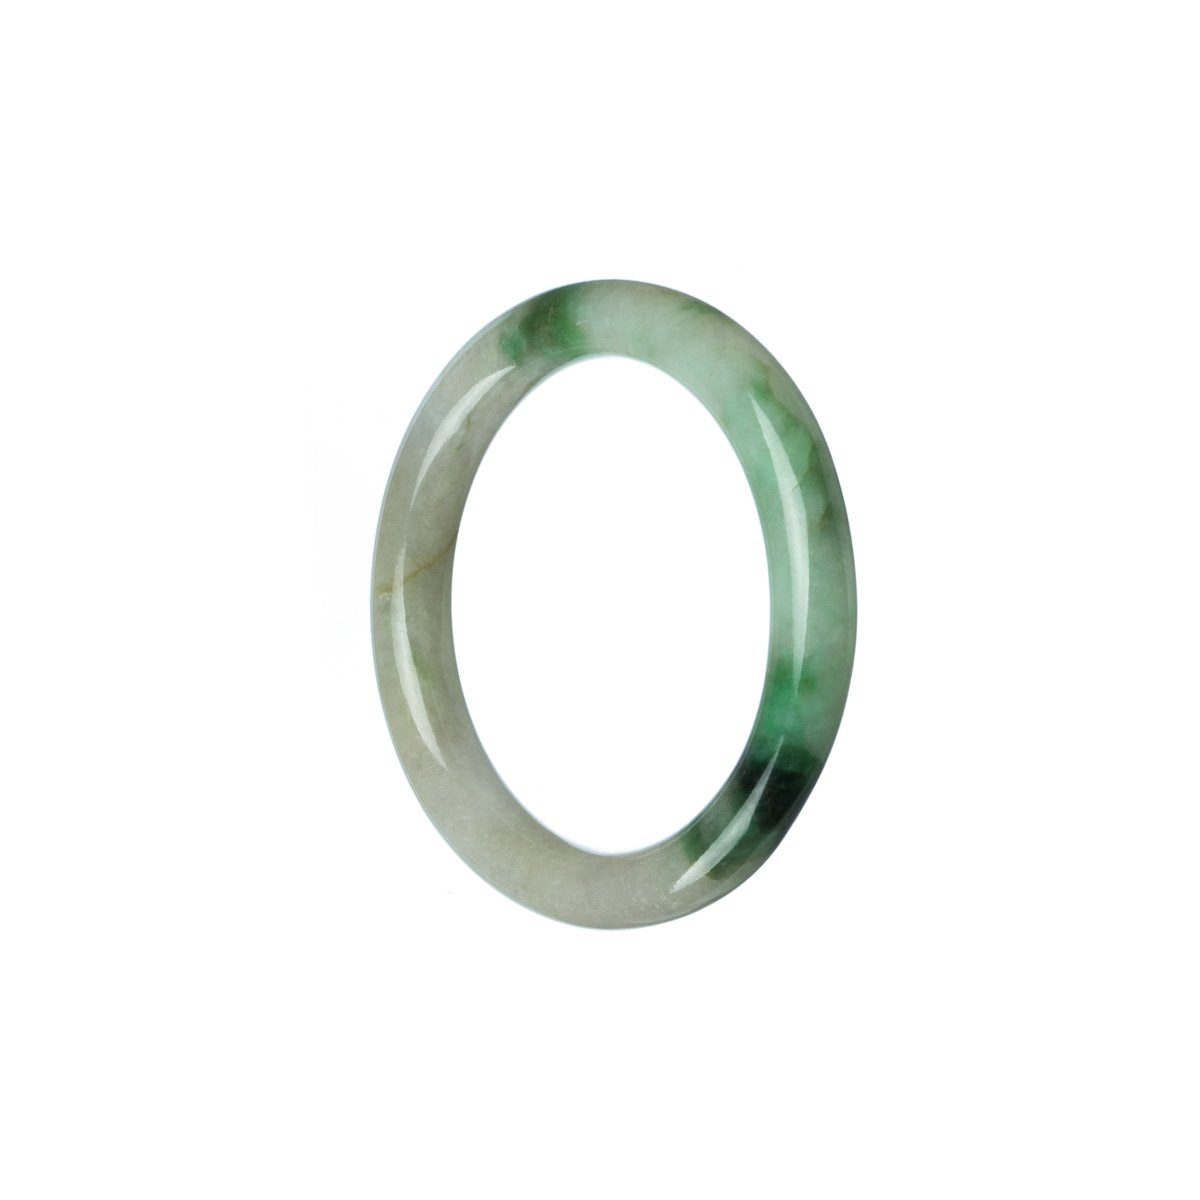 An exquisite green and white jadeite bangle, specifically designed for children.